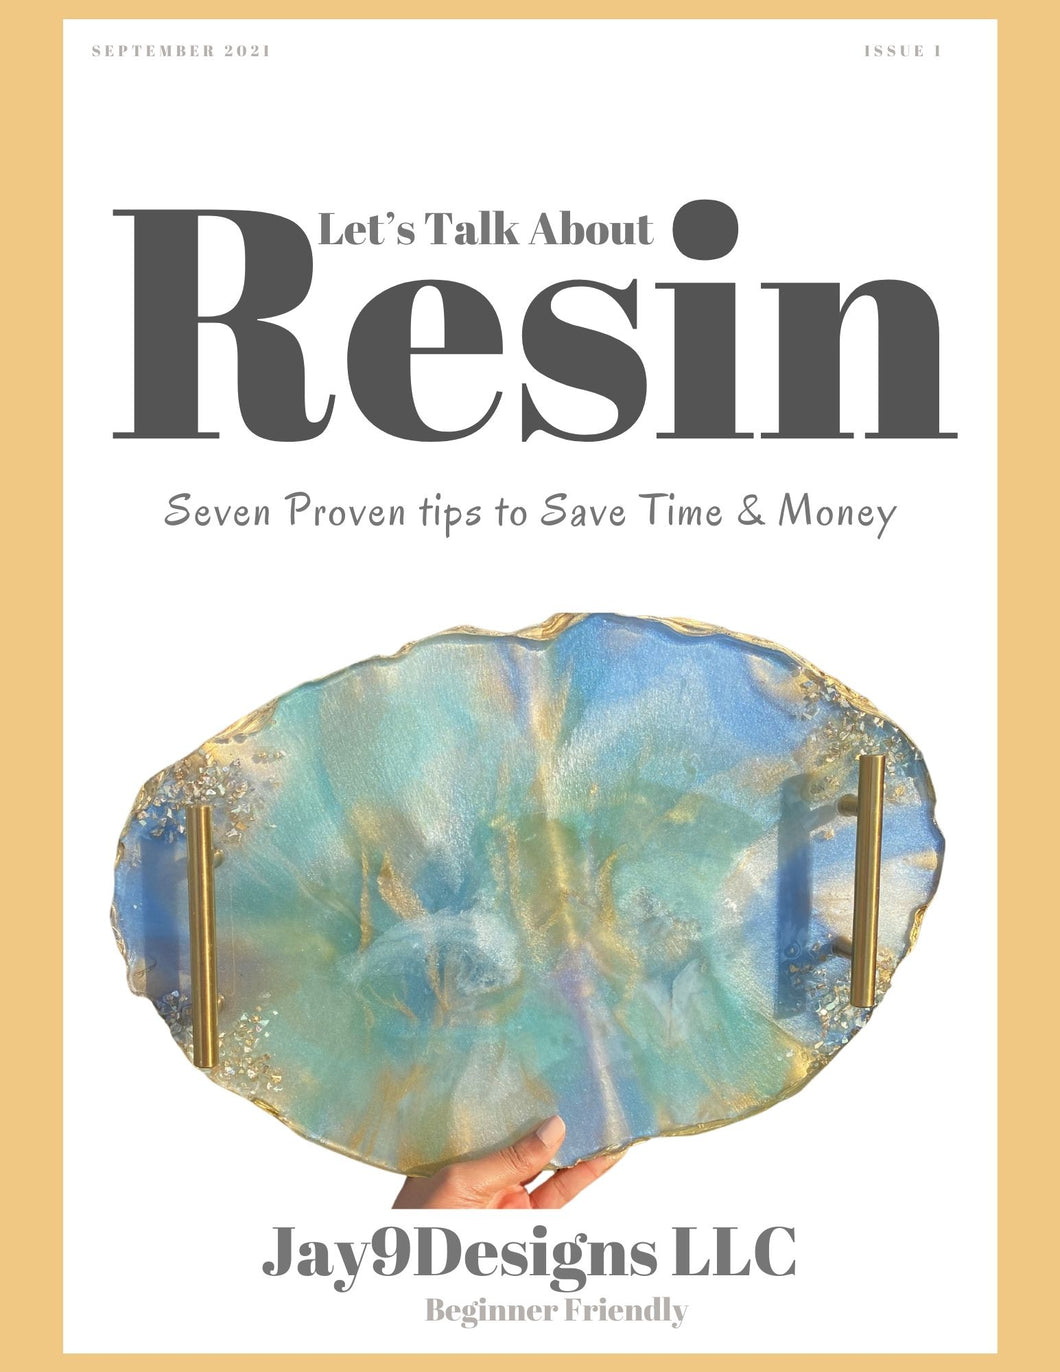 Let's Talk About Resin!